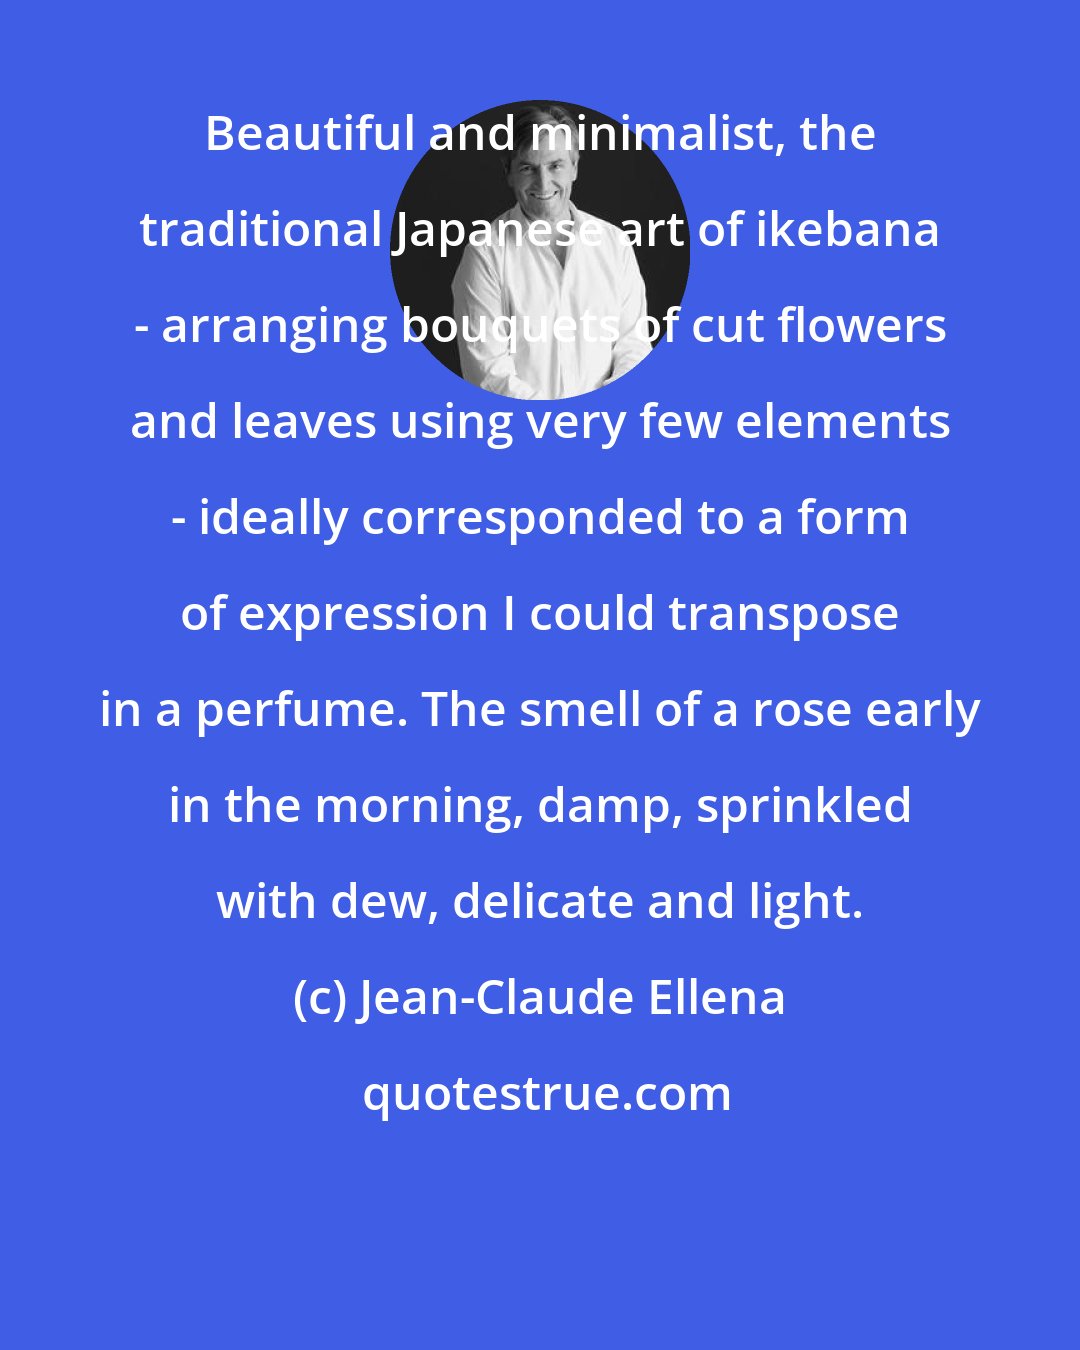 Jean-Claude Ellena: Beautiful and minimalist, the traditional Japanese art of ikebana - arranging bouquets of cut flowers and leaves using very few elements - ideally corresponded to a form of expression I could transpose in a perfume. The smell of a rose early in the morning, damp, sprinkled with dew, delicate and light.